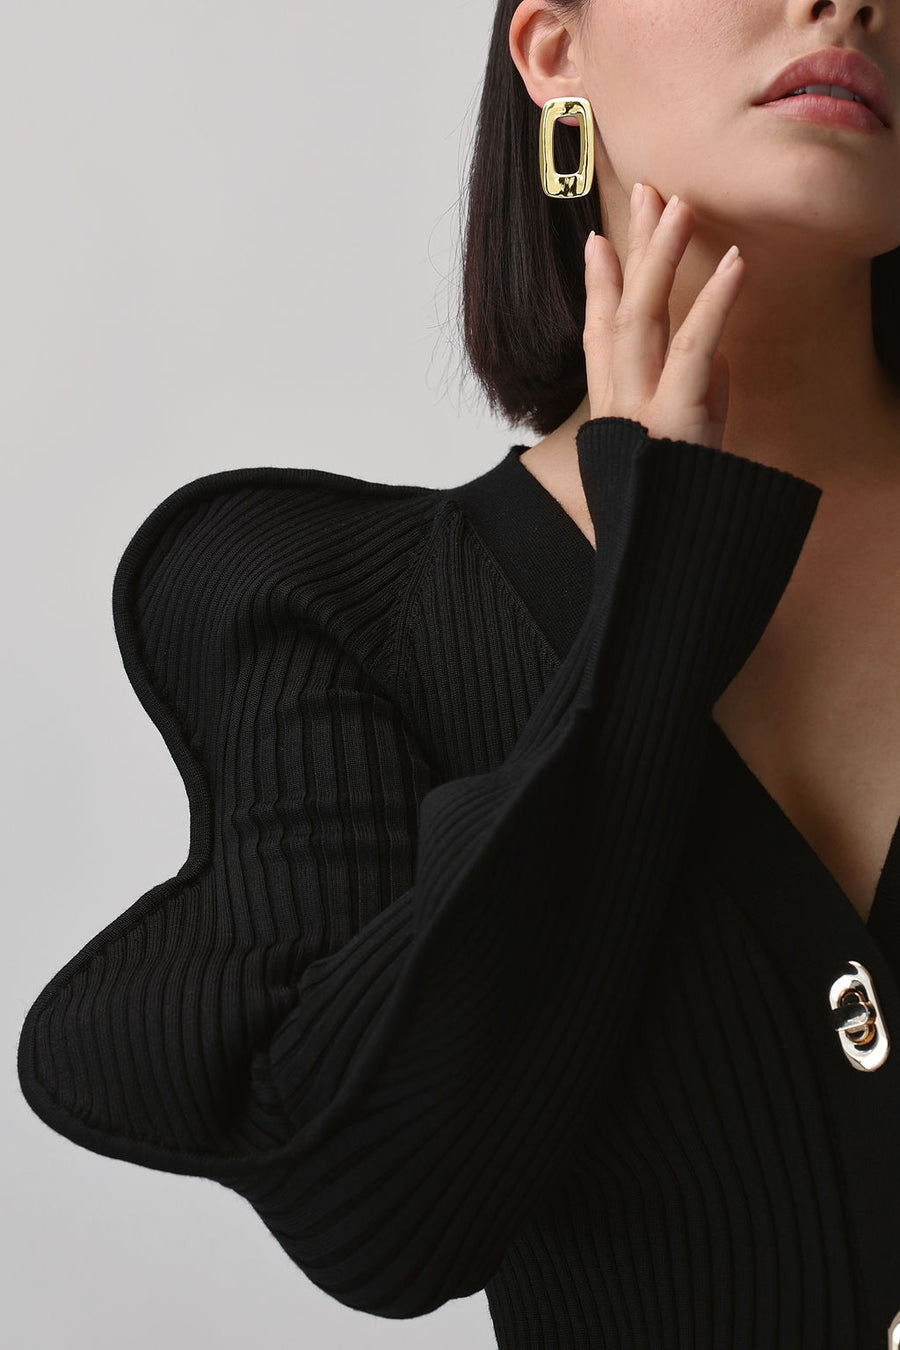 a close up shot of woman wearing a black knit and large gold earrings, touching the side of her jaw